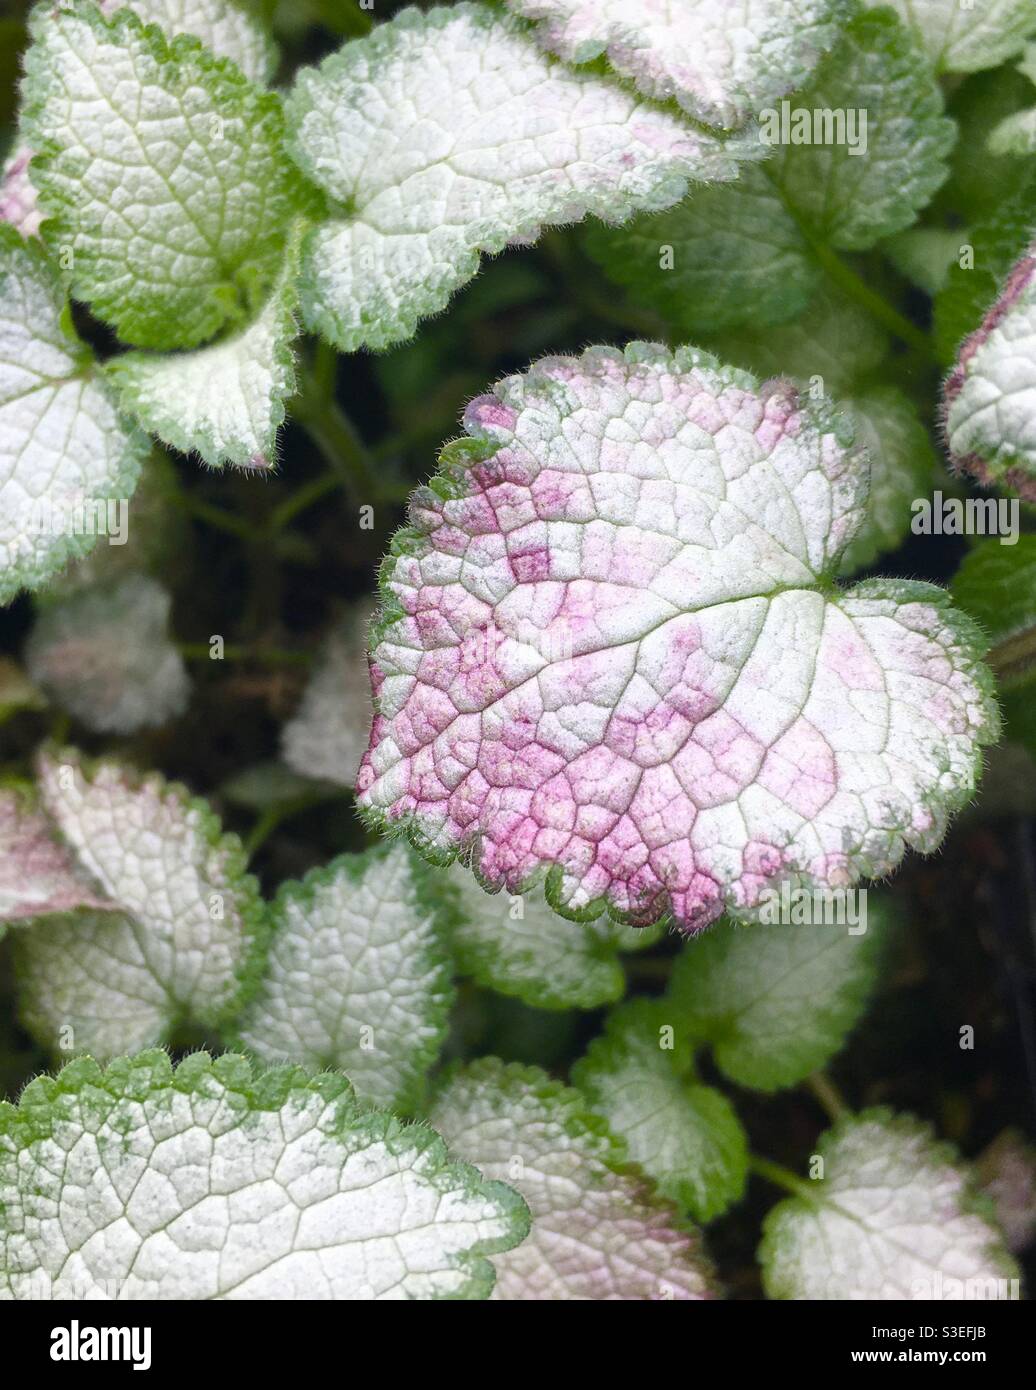 Lamium maculatum Beacon Siver - close-up of leaves with green, white and pink colouration. Taken in London, UK. Stock Photo